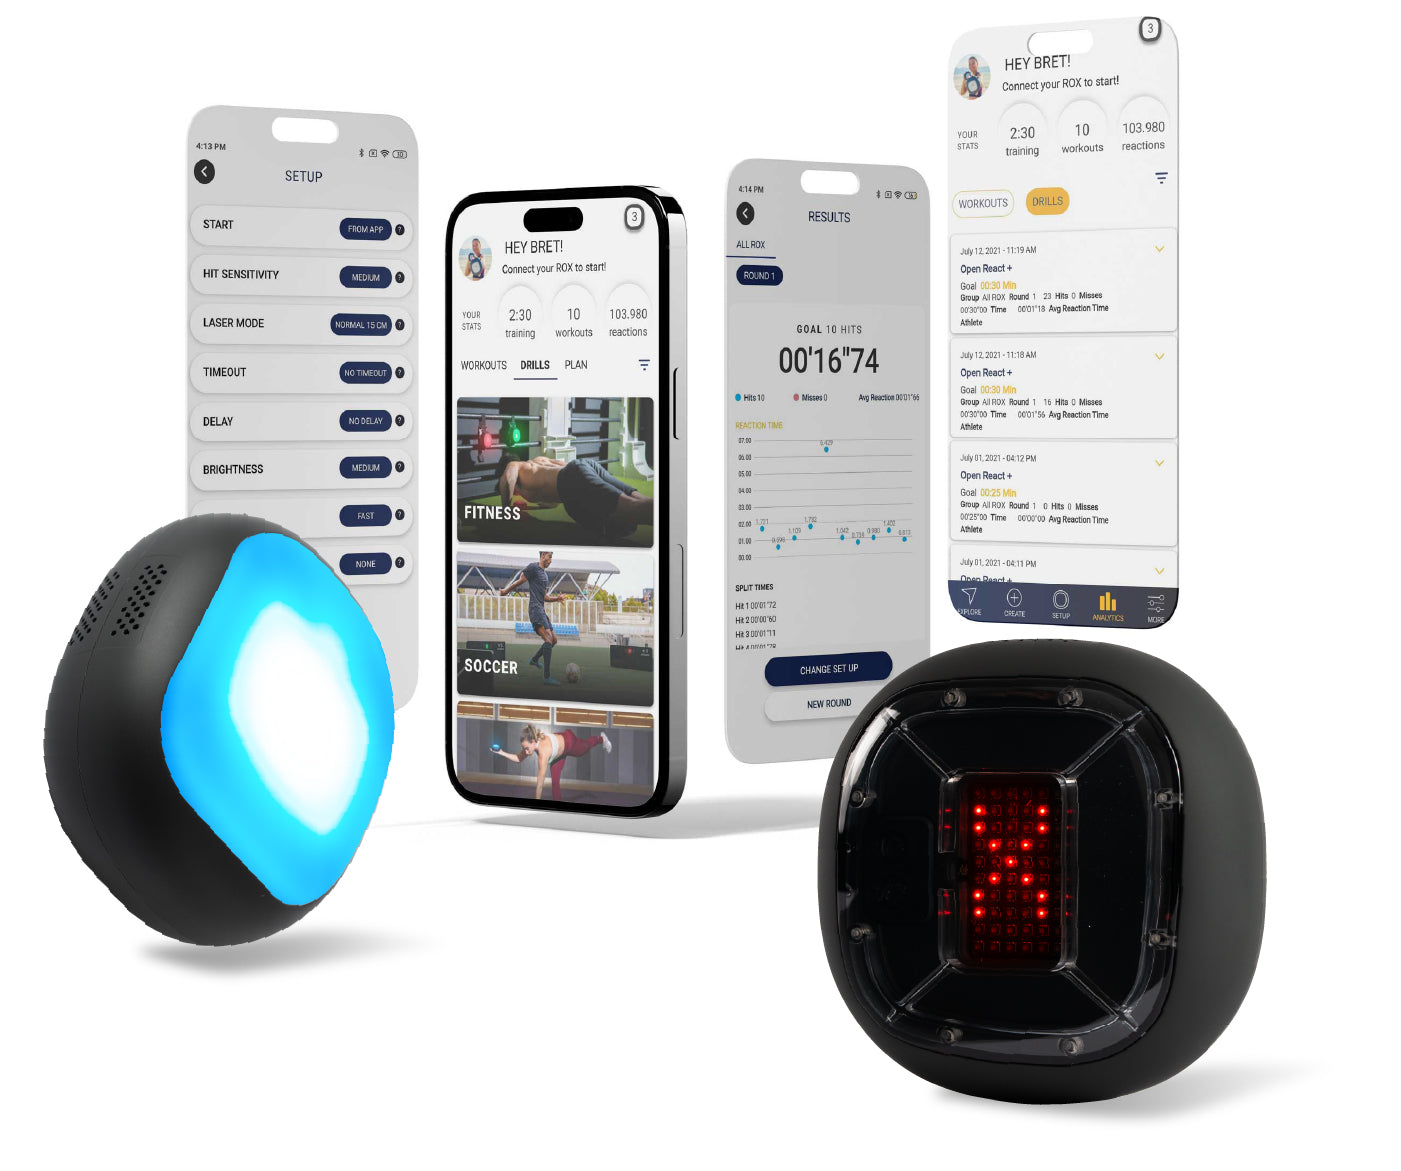 The image showcases a collection of high-tech training equipment and app interfaces. It features a ROXPro glowing with blue light, and a ROXProX with a red illuminated LED grid, likely for performance feedback, displaying the letter "X". In the center is a smartphone showing a fitness app screen with a personal greeting, workout stats, and options for different activities like fitness and soccer.